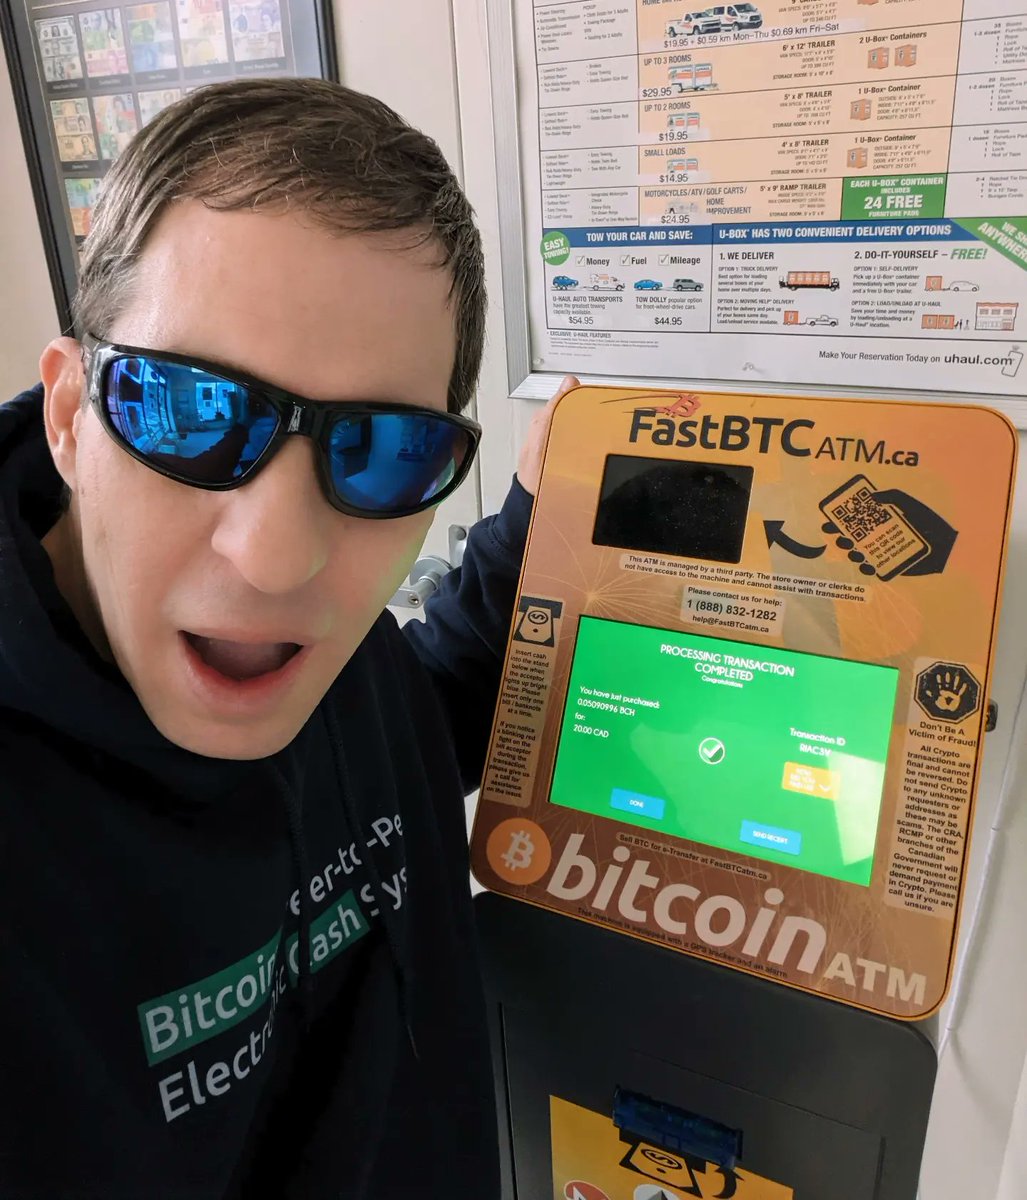 Bitcoin: A Peer-to-Peer Electronic Cash System @fastbtcatm⚡ #BCH💚